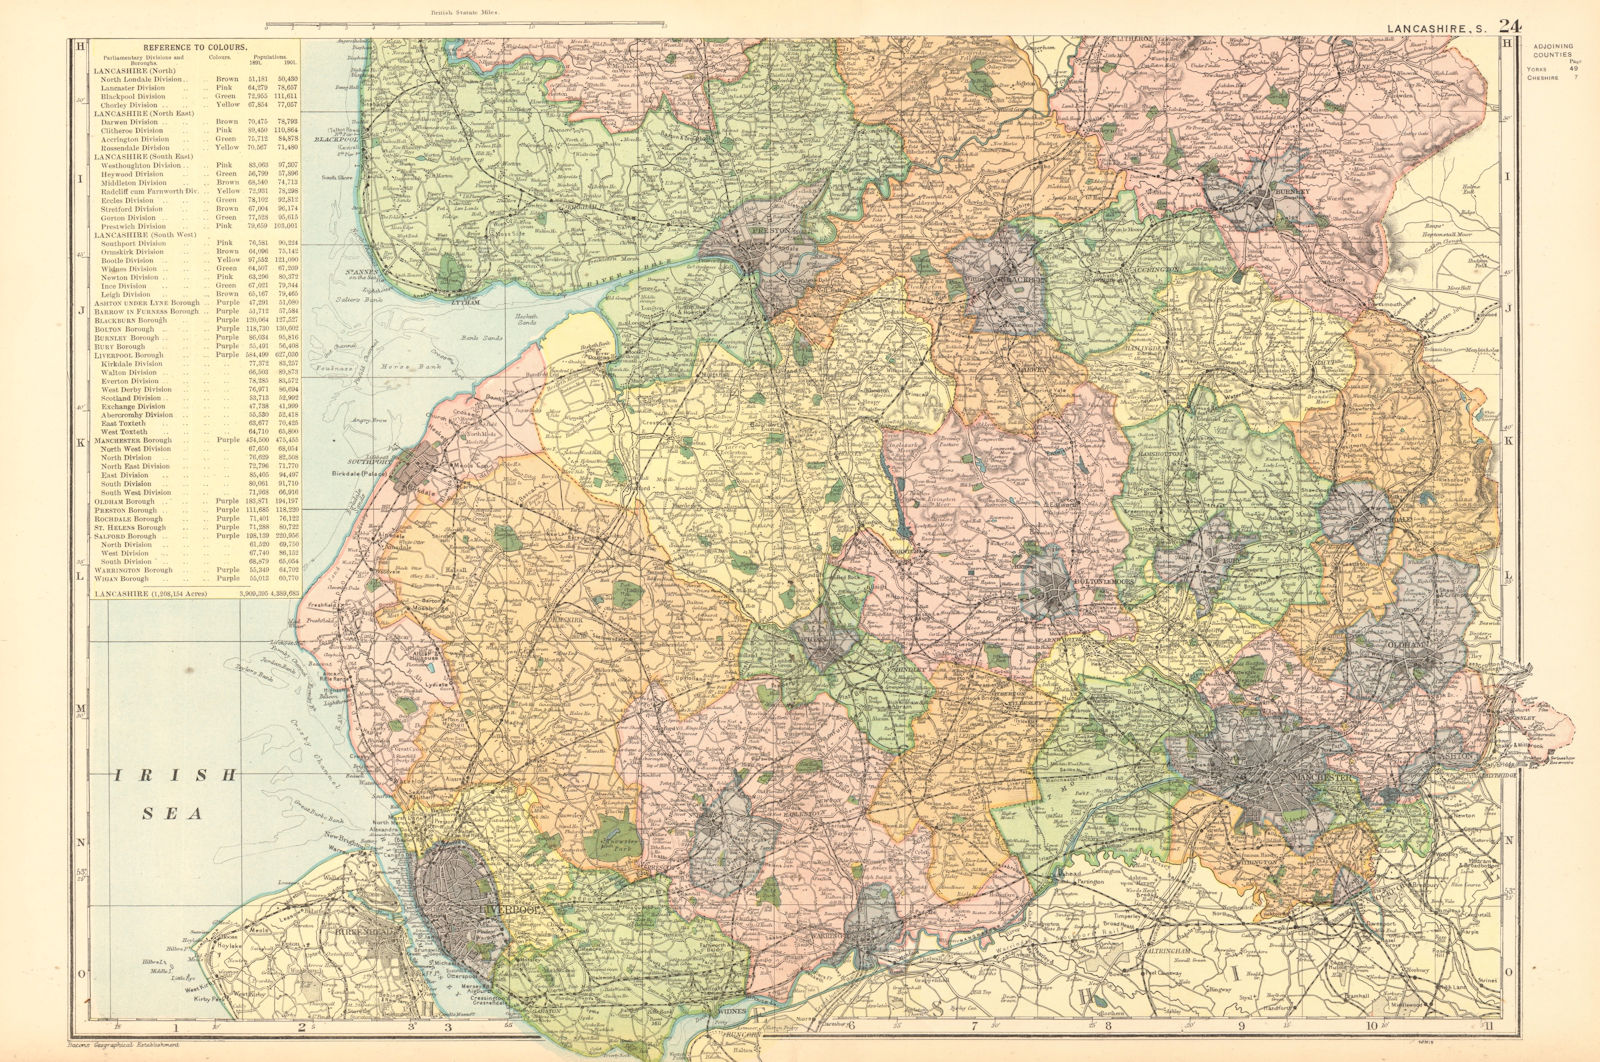 LANCASHIRE (SOUTH). Showing Parliamentary divisions & parks. BACON 1904 map